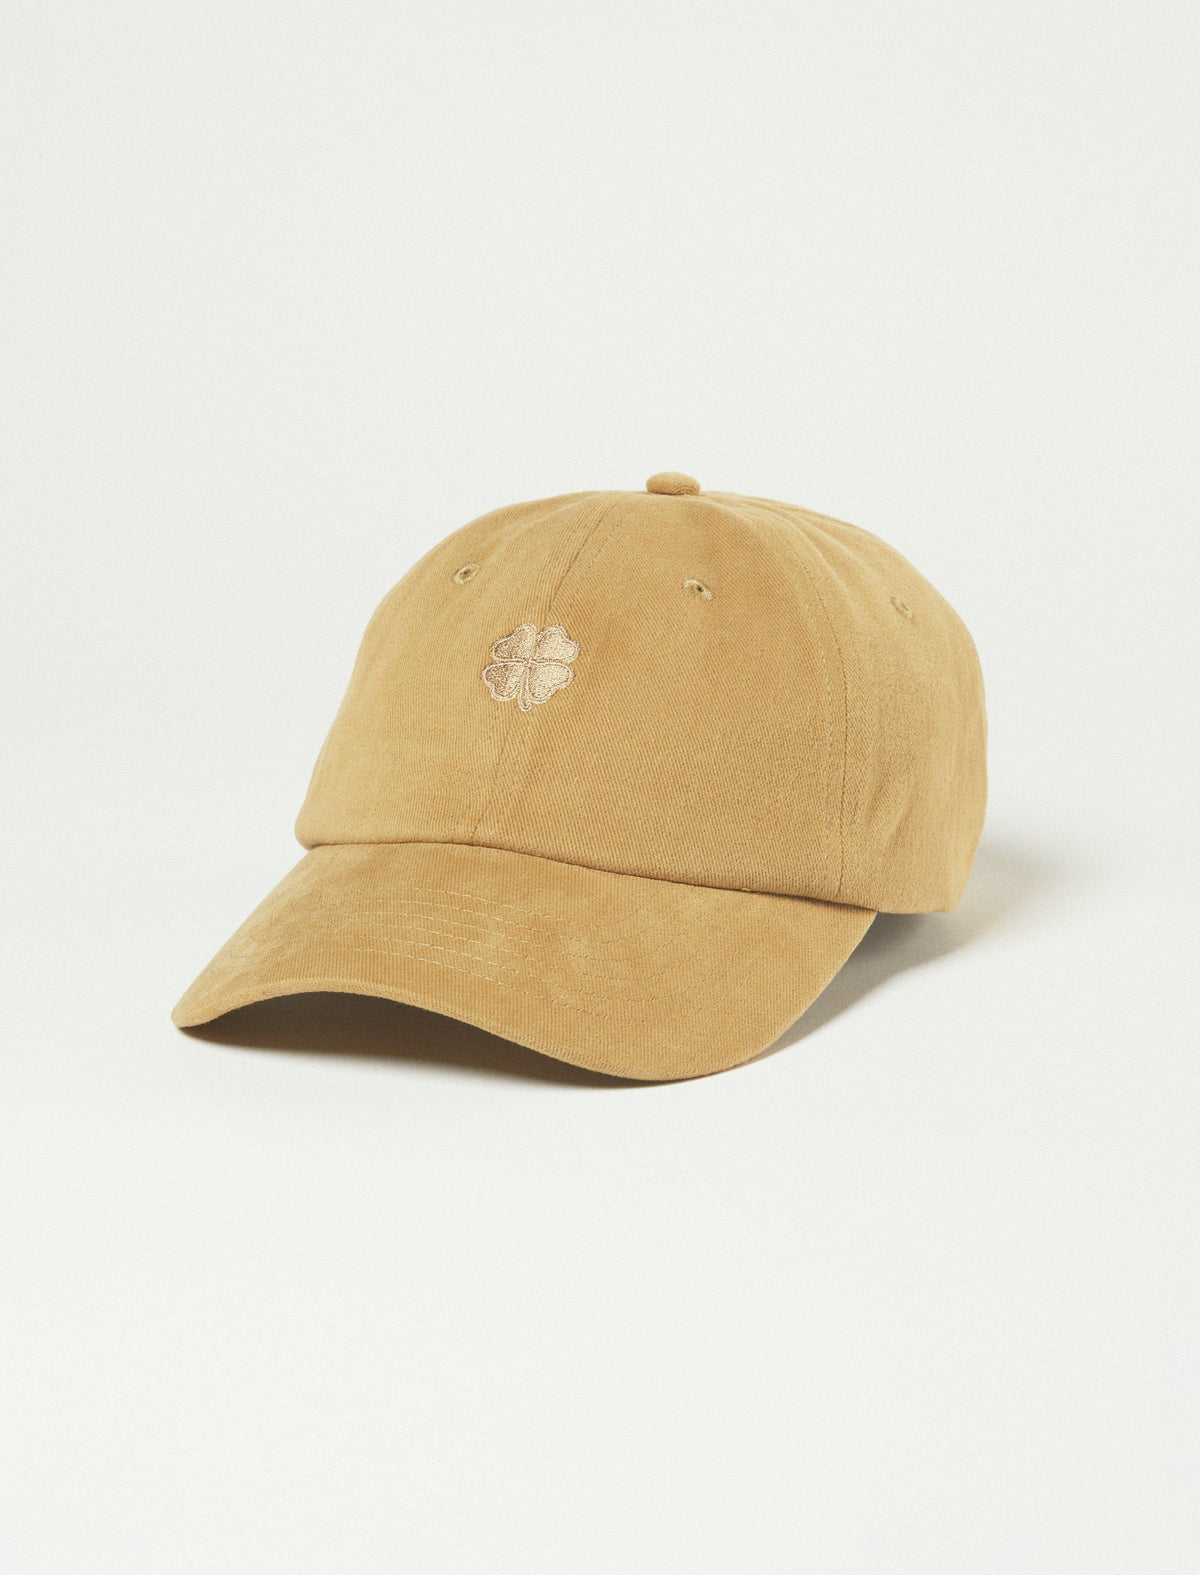 Lucky Brand Washed Canvas Baseball Cap Dark Brown